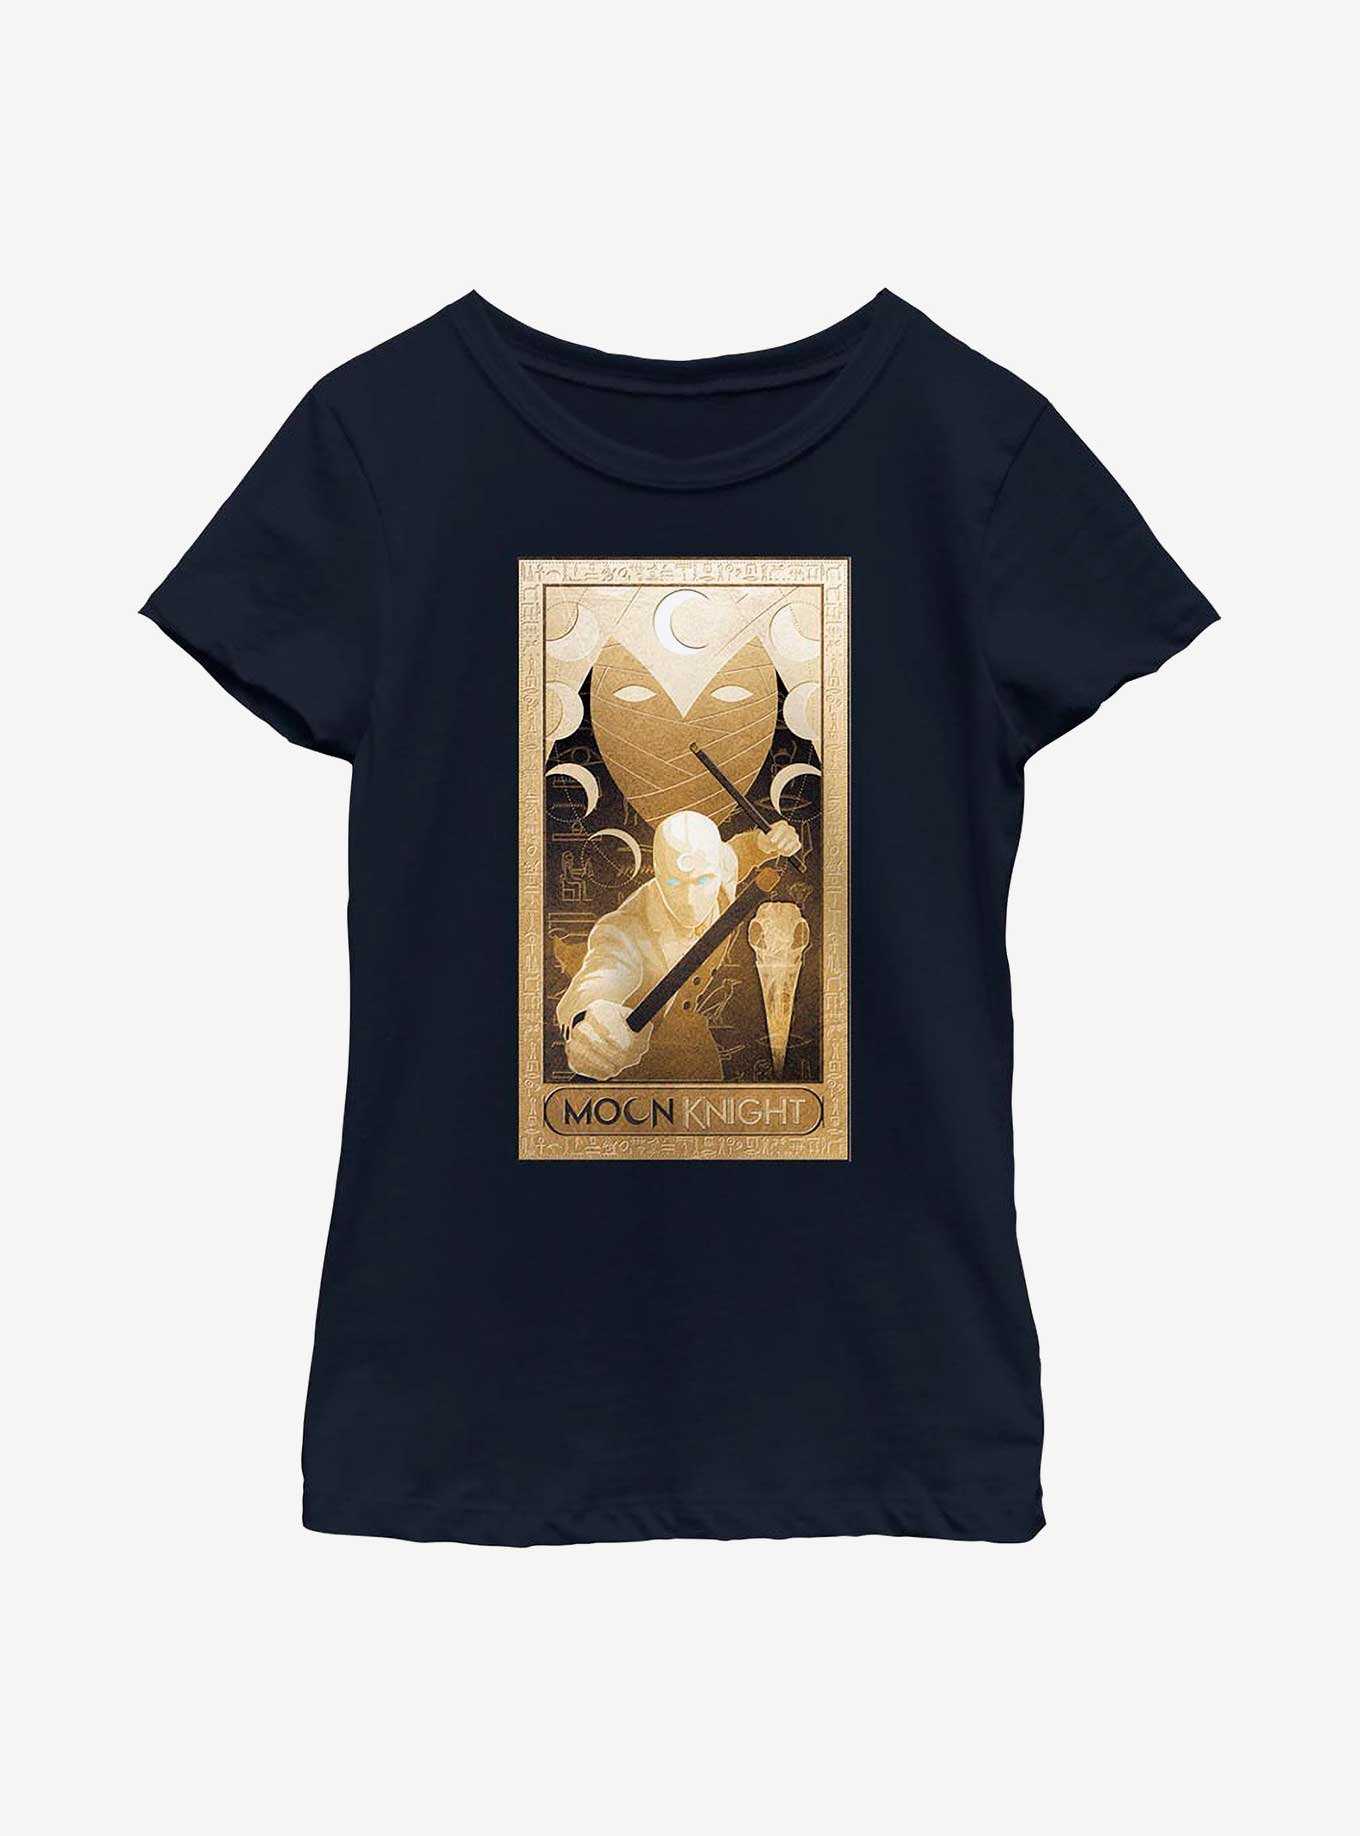 Marvel Moon Knight Gold Glyphs Poster Youth Girls T-Shirt, , hi-res